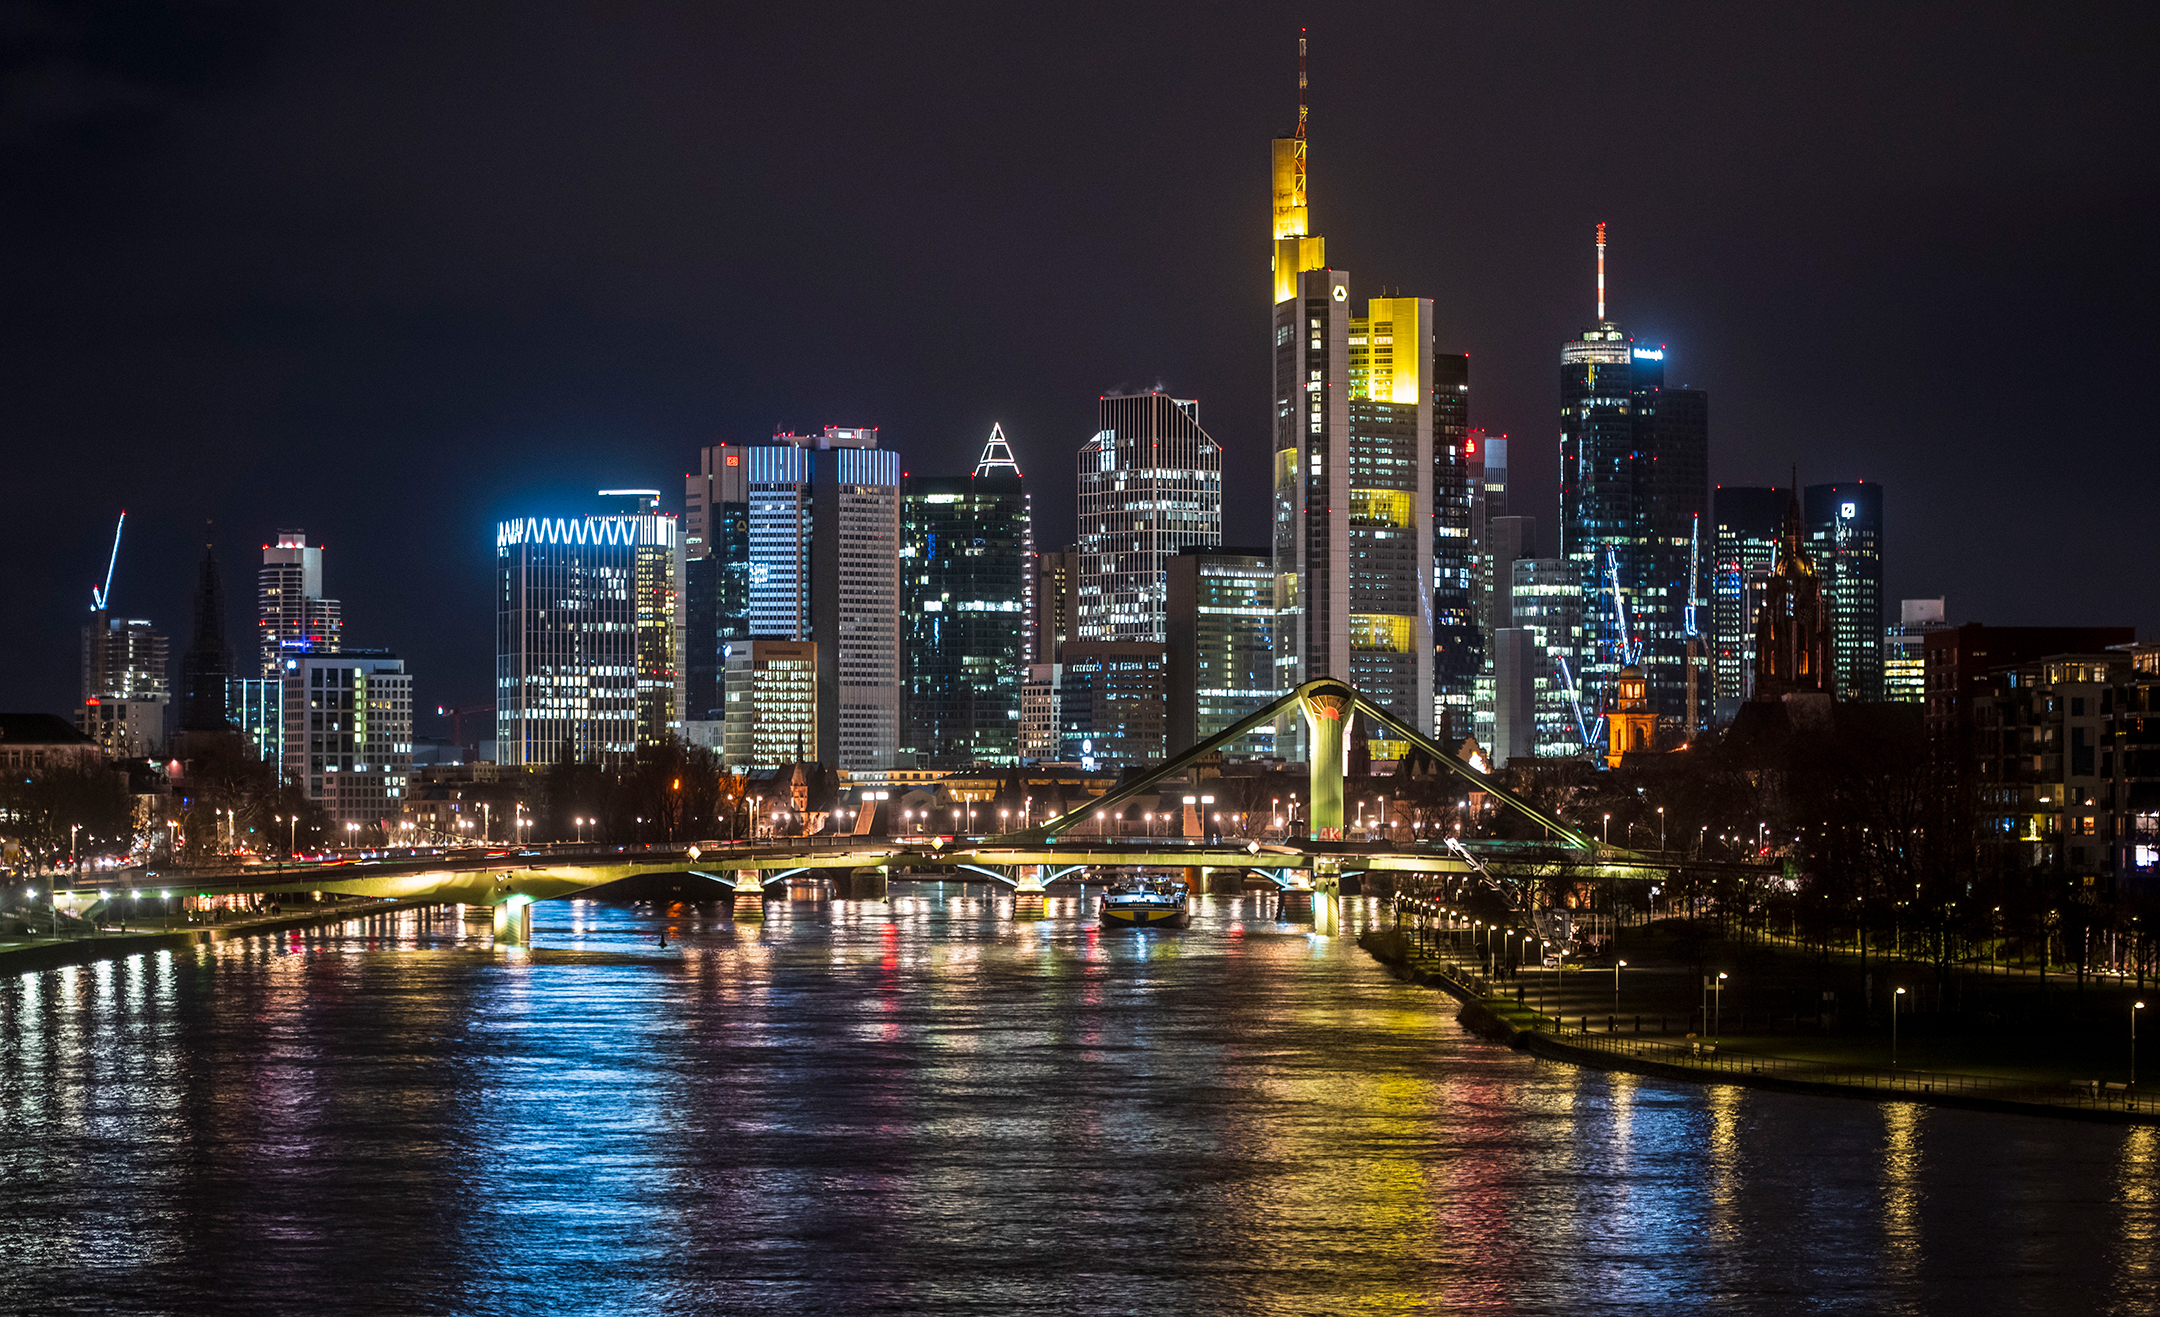 The skyline of Frankfurt's finance and banking district illuminated in the night